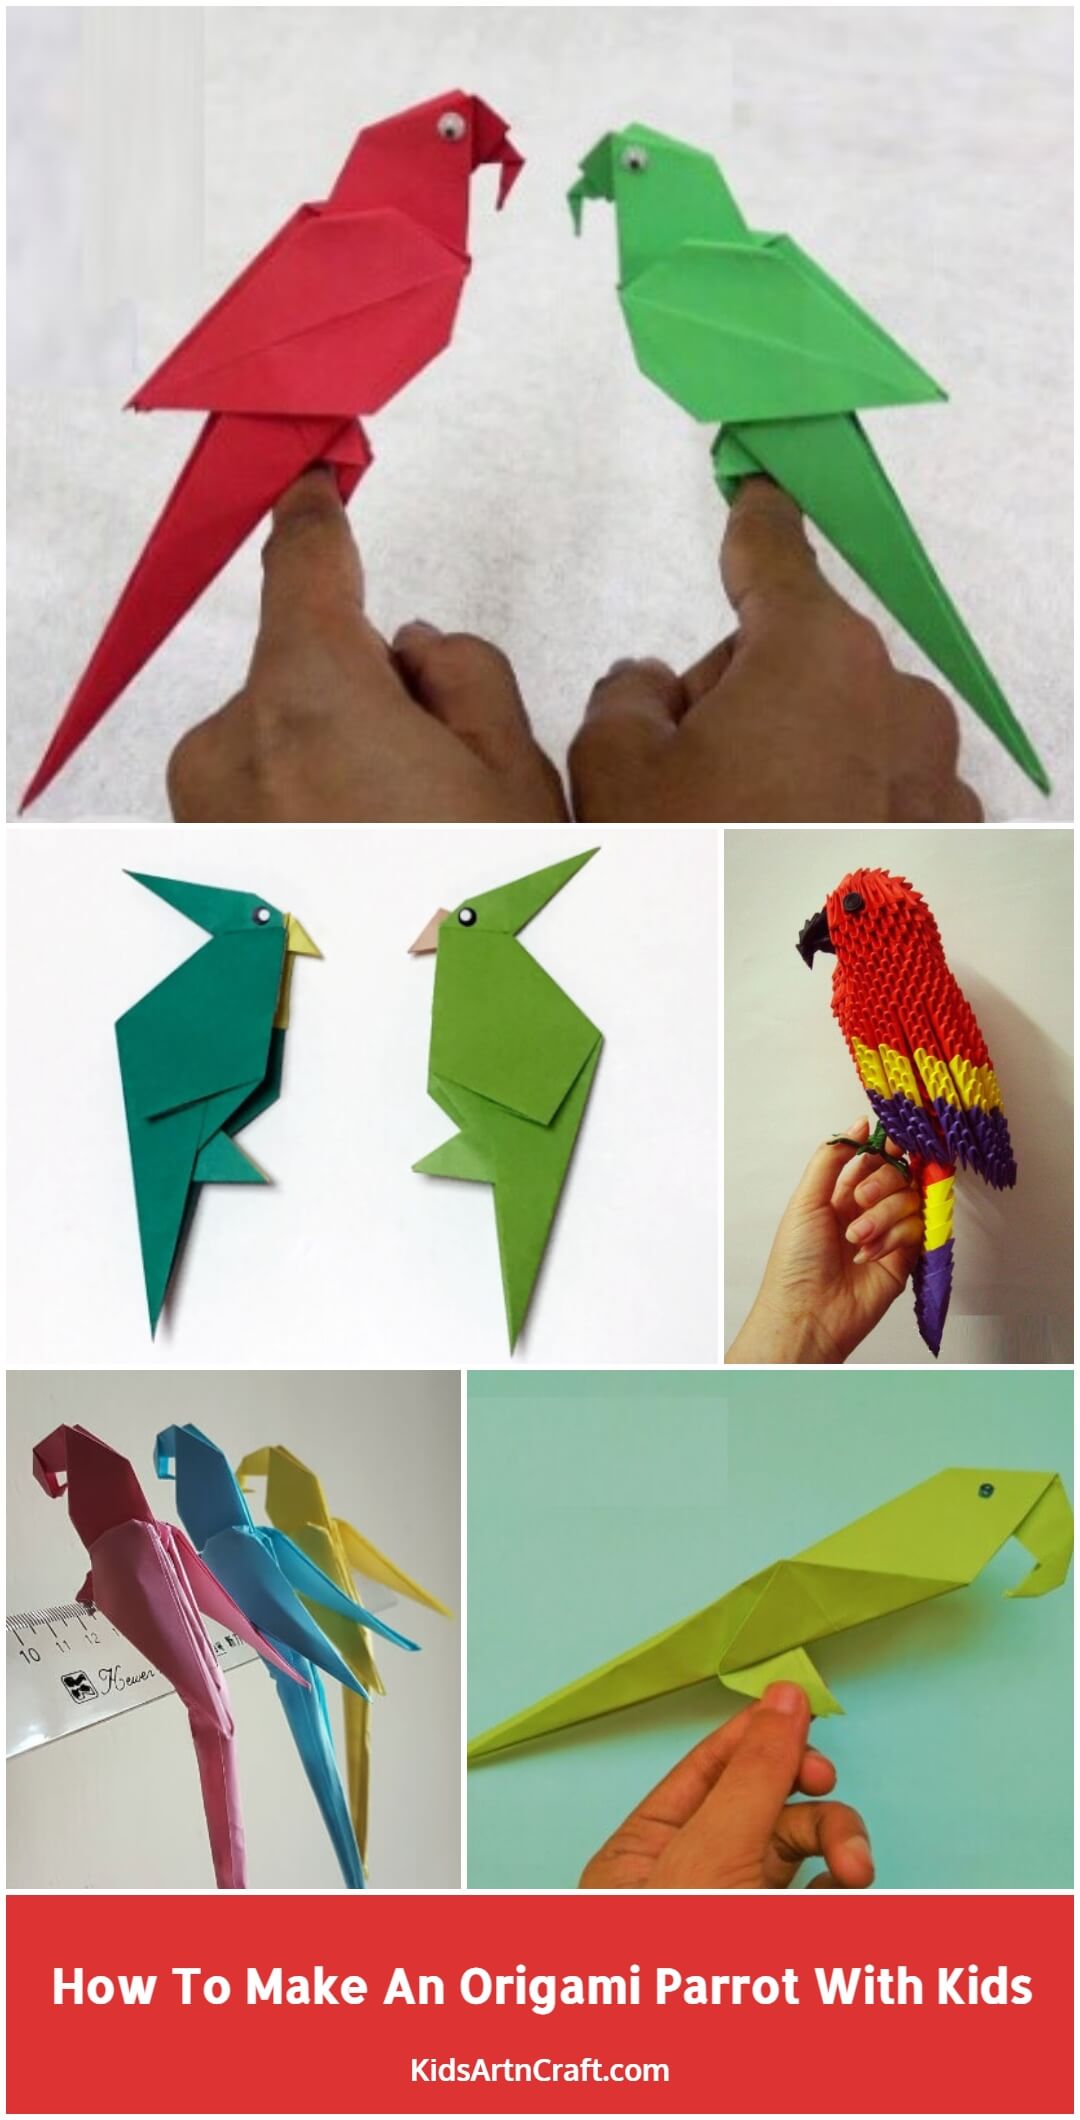 How To Make An Origami Parrot With Kids